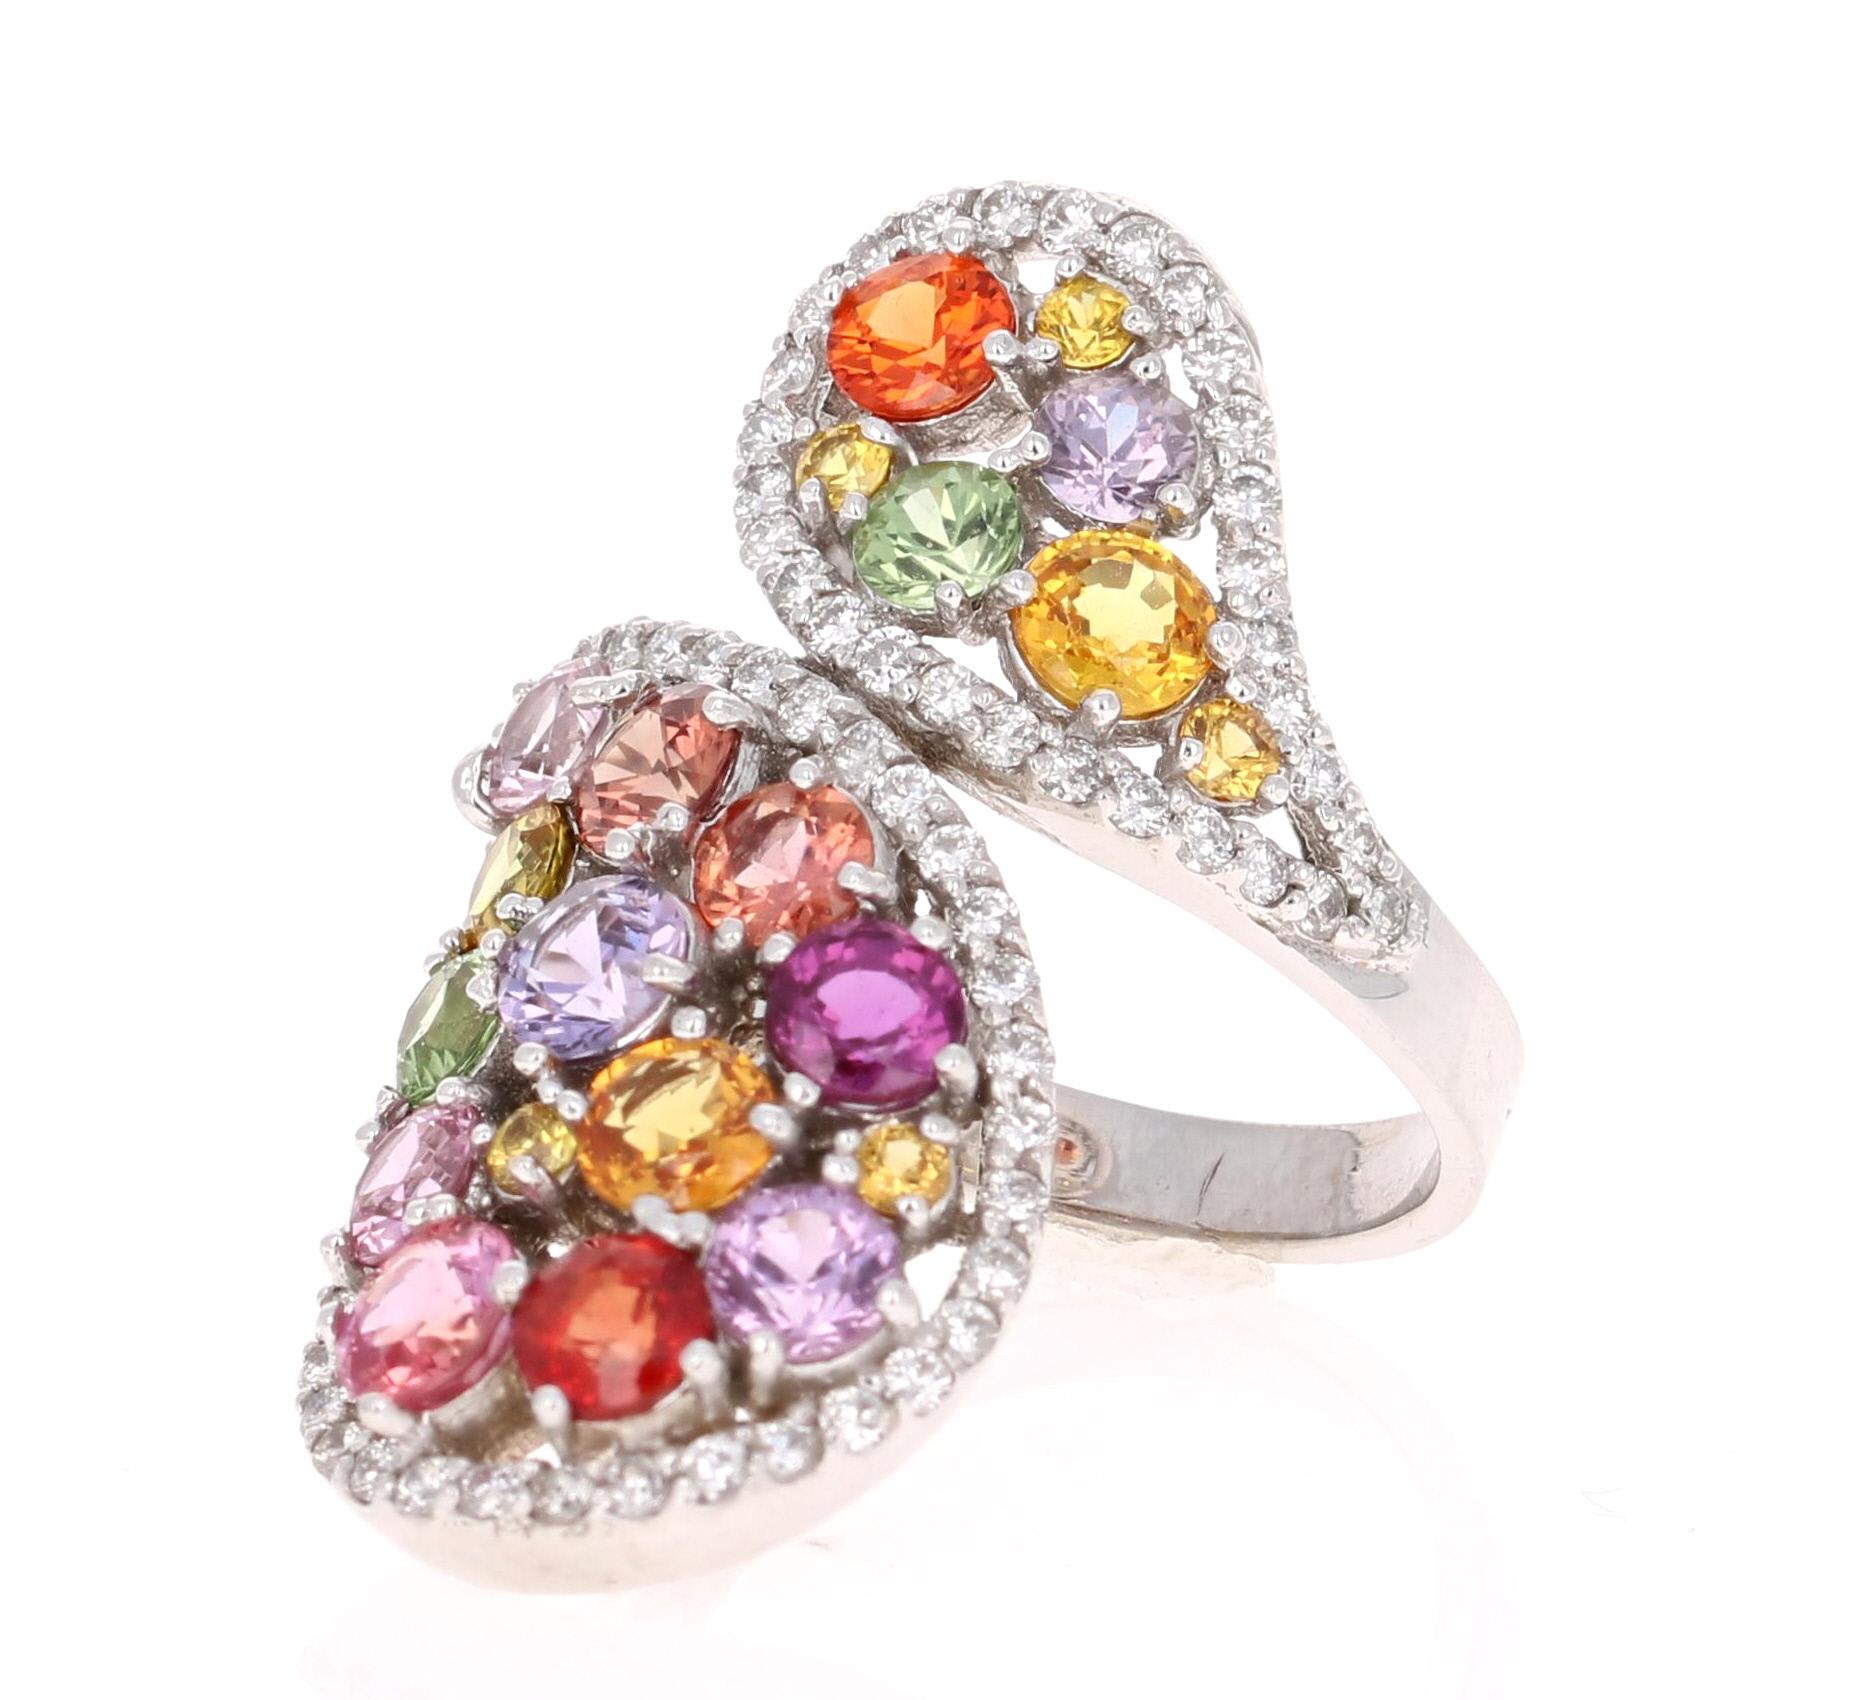 Super gorgeous and uniquely designed 5.43 Carat Multi-Colored Sapphire and Diamond 14K White Gold Cocktail Ring!

This ring has a cluster of 22 Round Cut Multi-Colored Sapphires that weigh 4.65 carats and 73 Round Cut Diamonds that weigh 0.78 carats